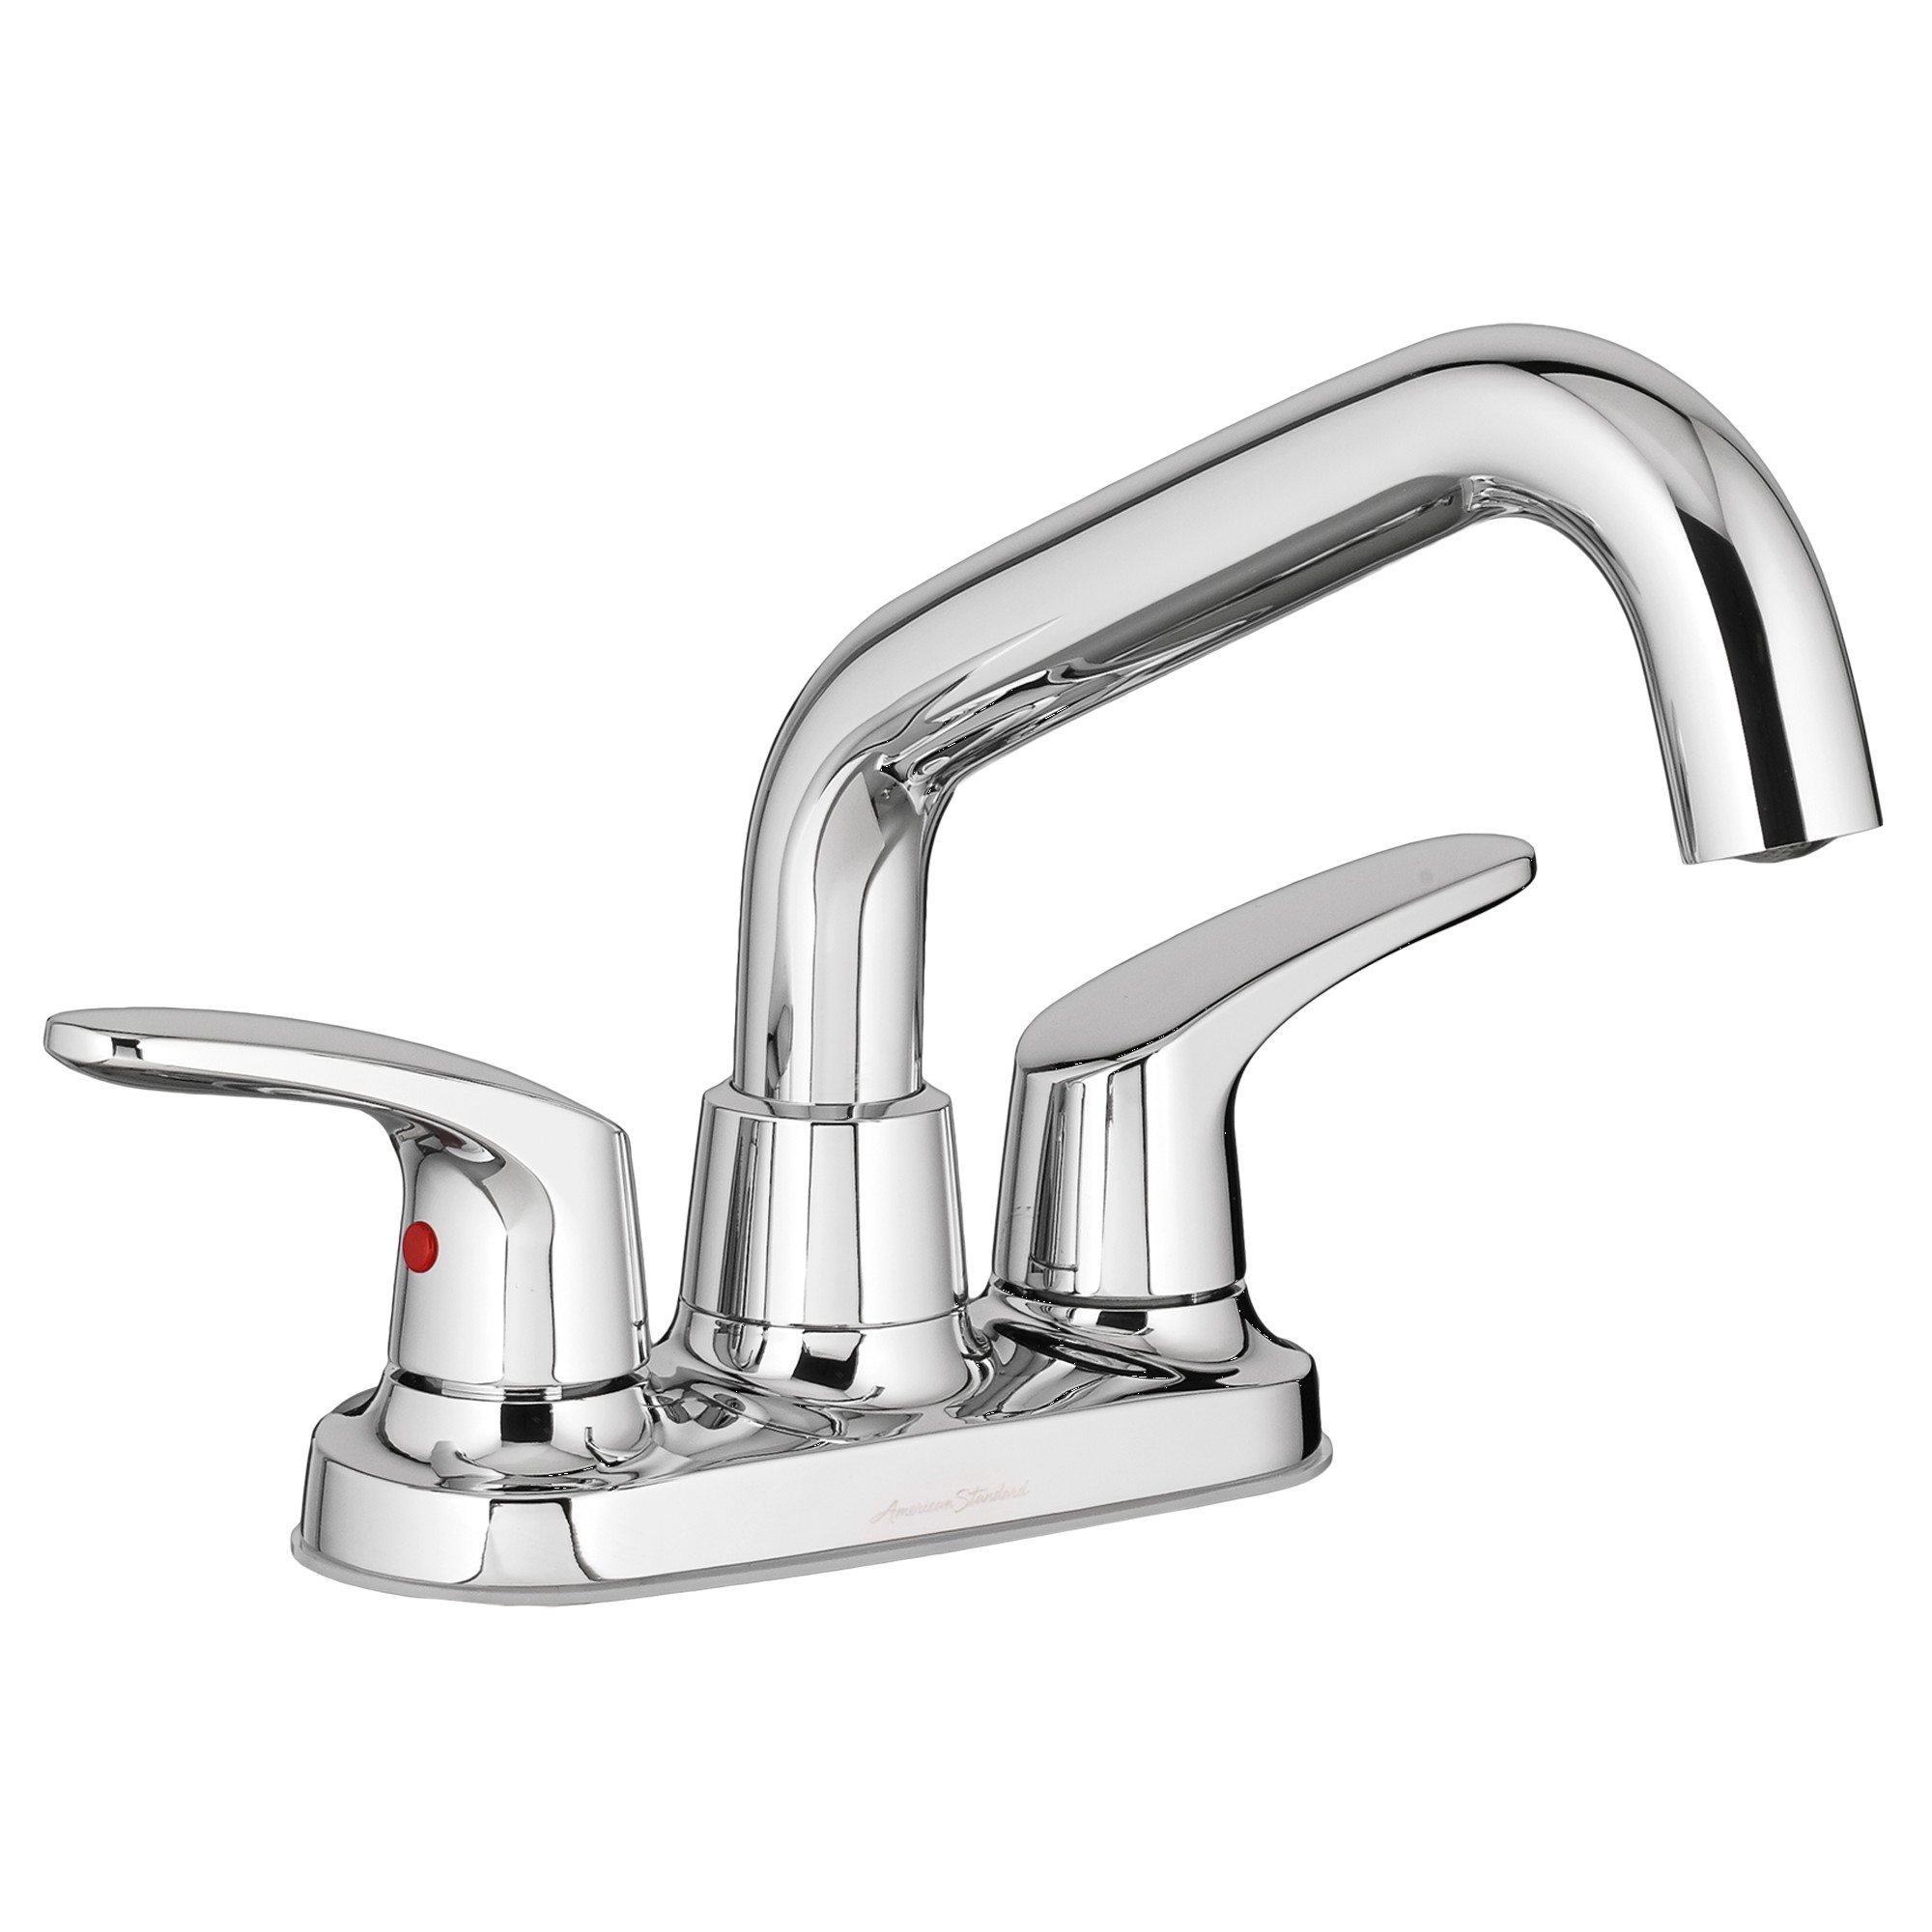 American Standard | 7074.140.002 | AMERICAN STANDARD 7074.140 COLONY PRO 2HANDLE LAUNDRY FAUCET CP 002 POLISHED CHROME